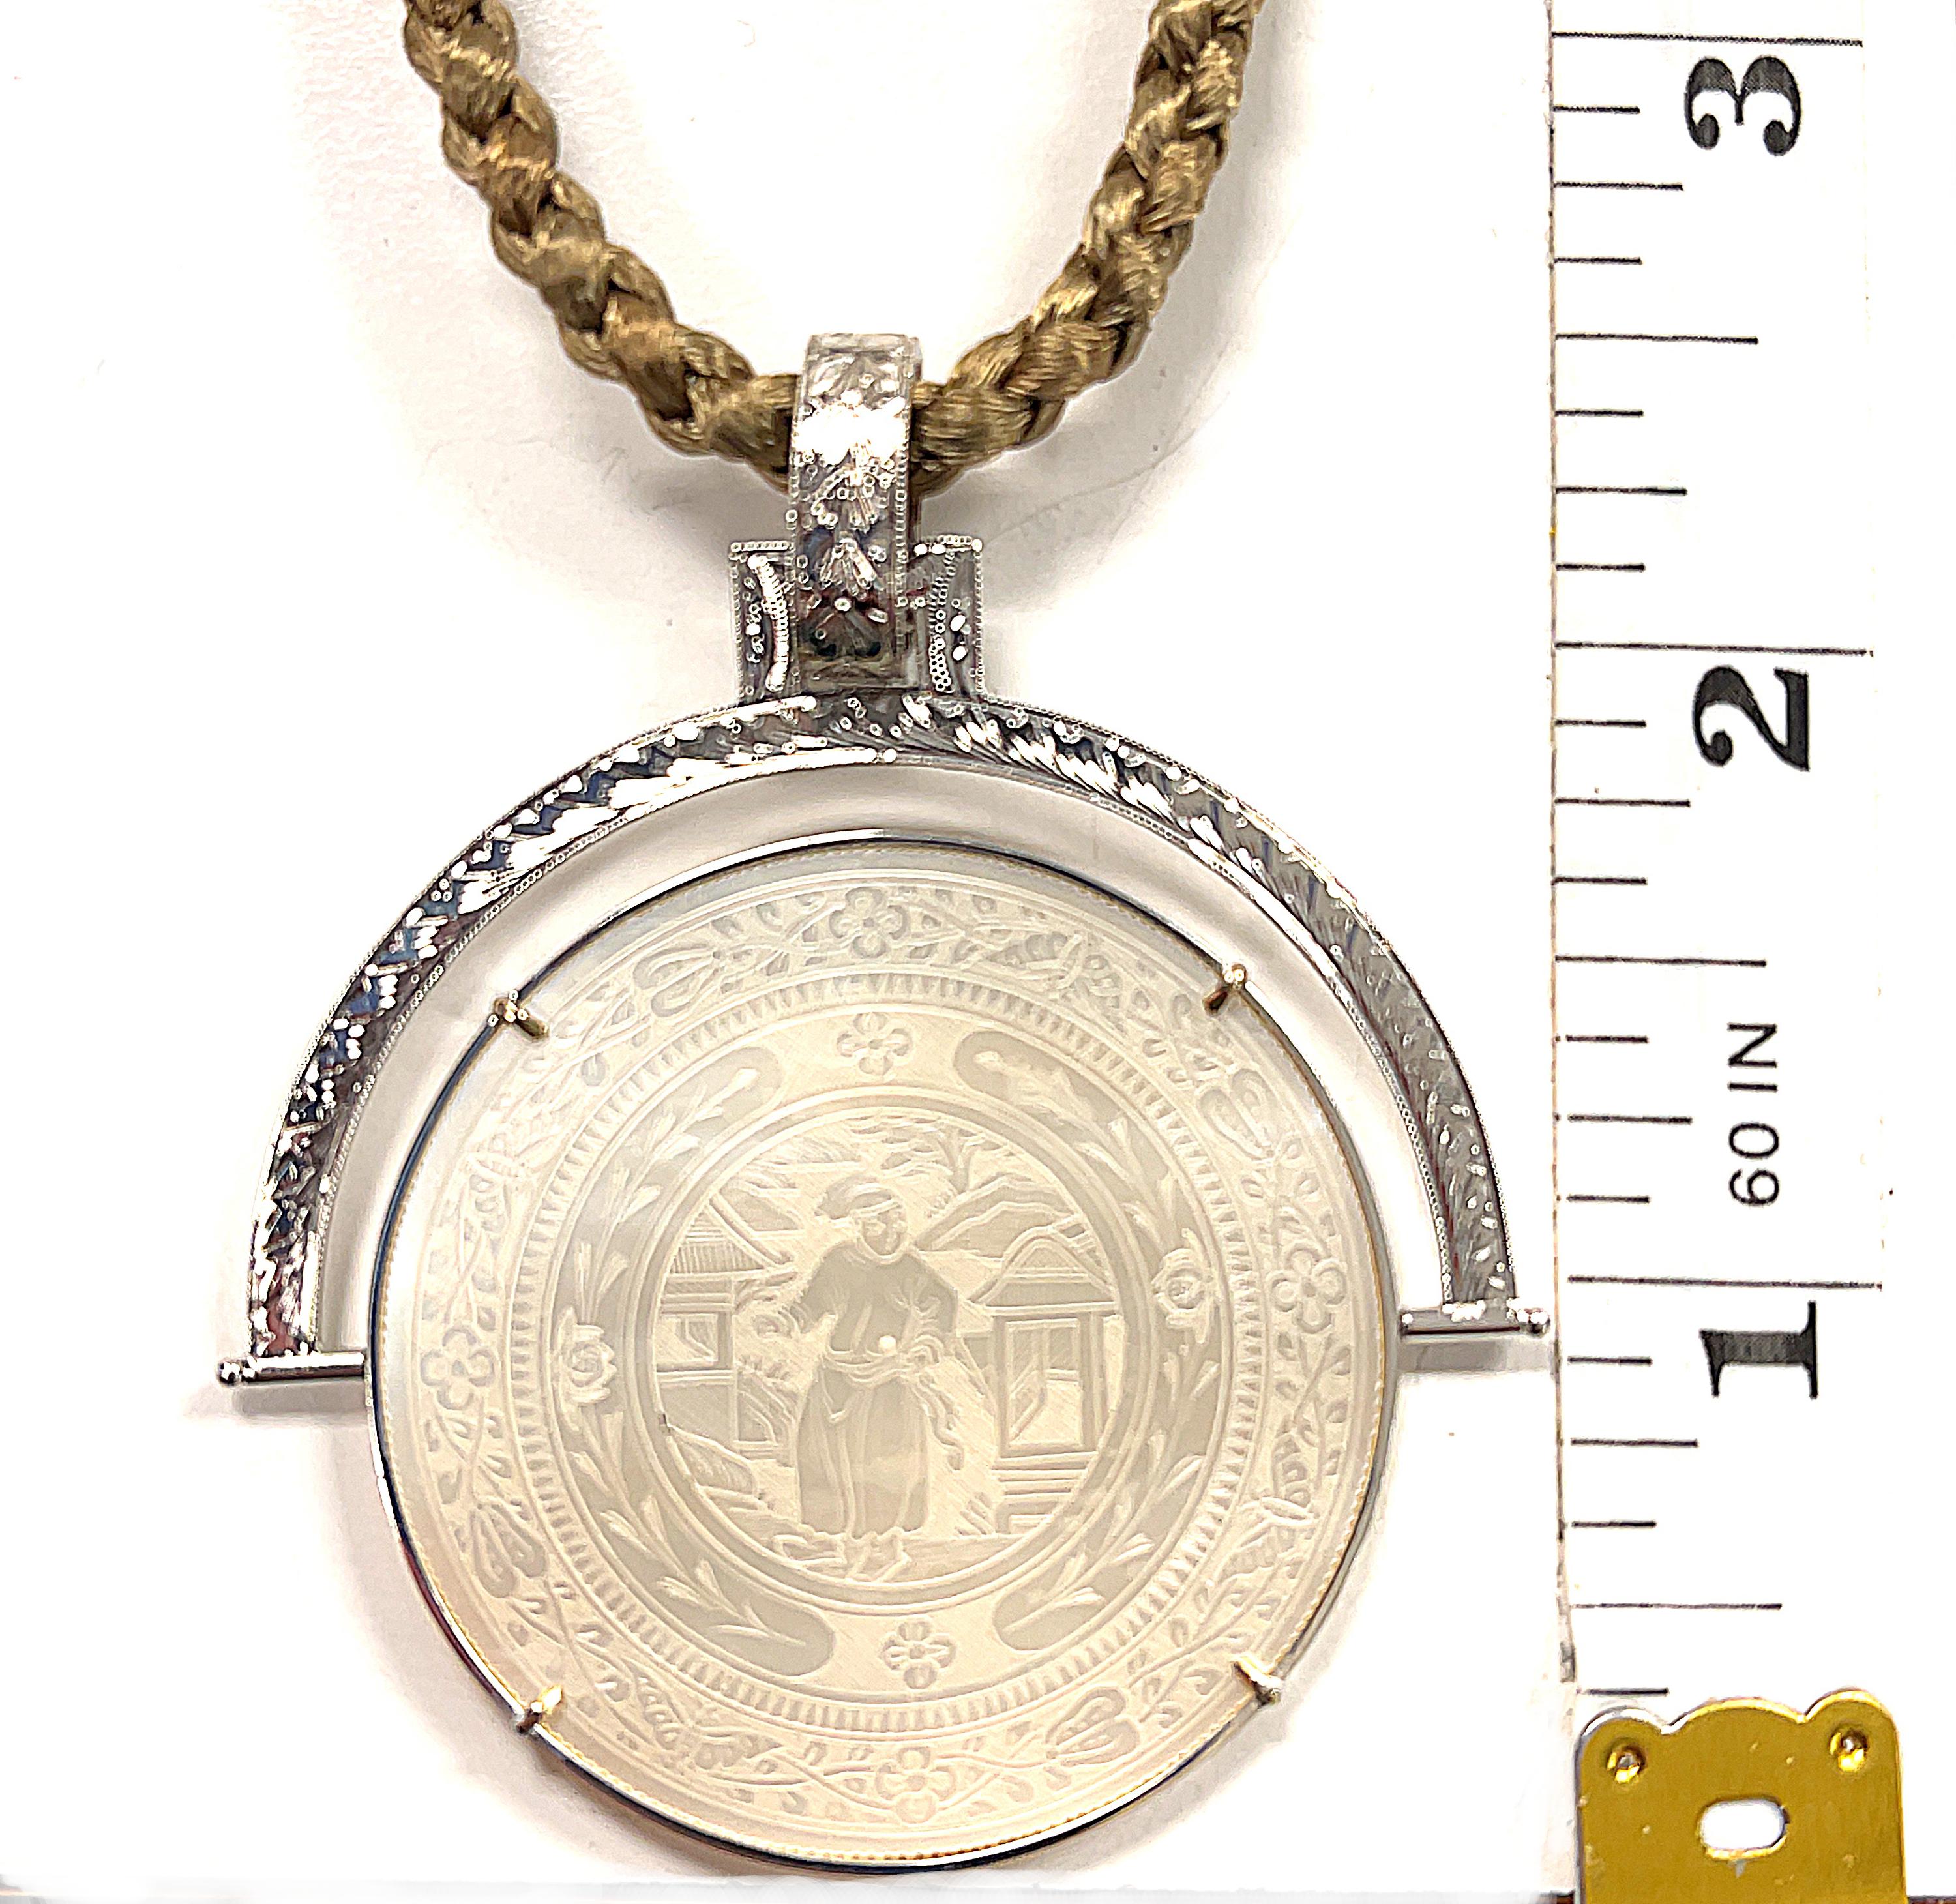 This reversible pendant / enhancer is a beautiful statement piece featuring a large, antique mother-of-pearl gambling counter set in 14k white gold. The round gaming counter has been intricately hand-engraved with a scene depicting life in ancient